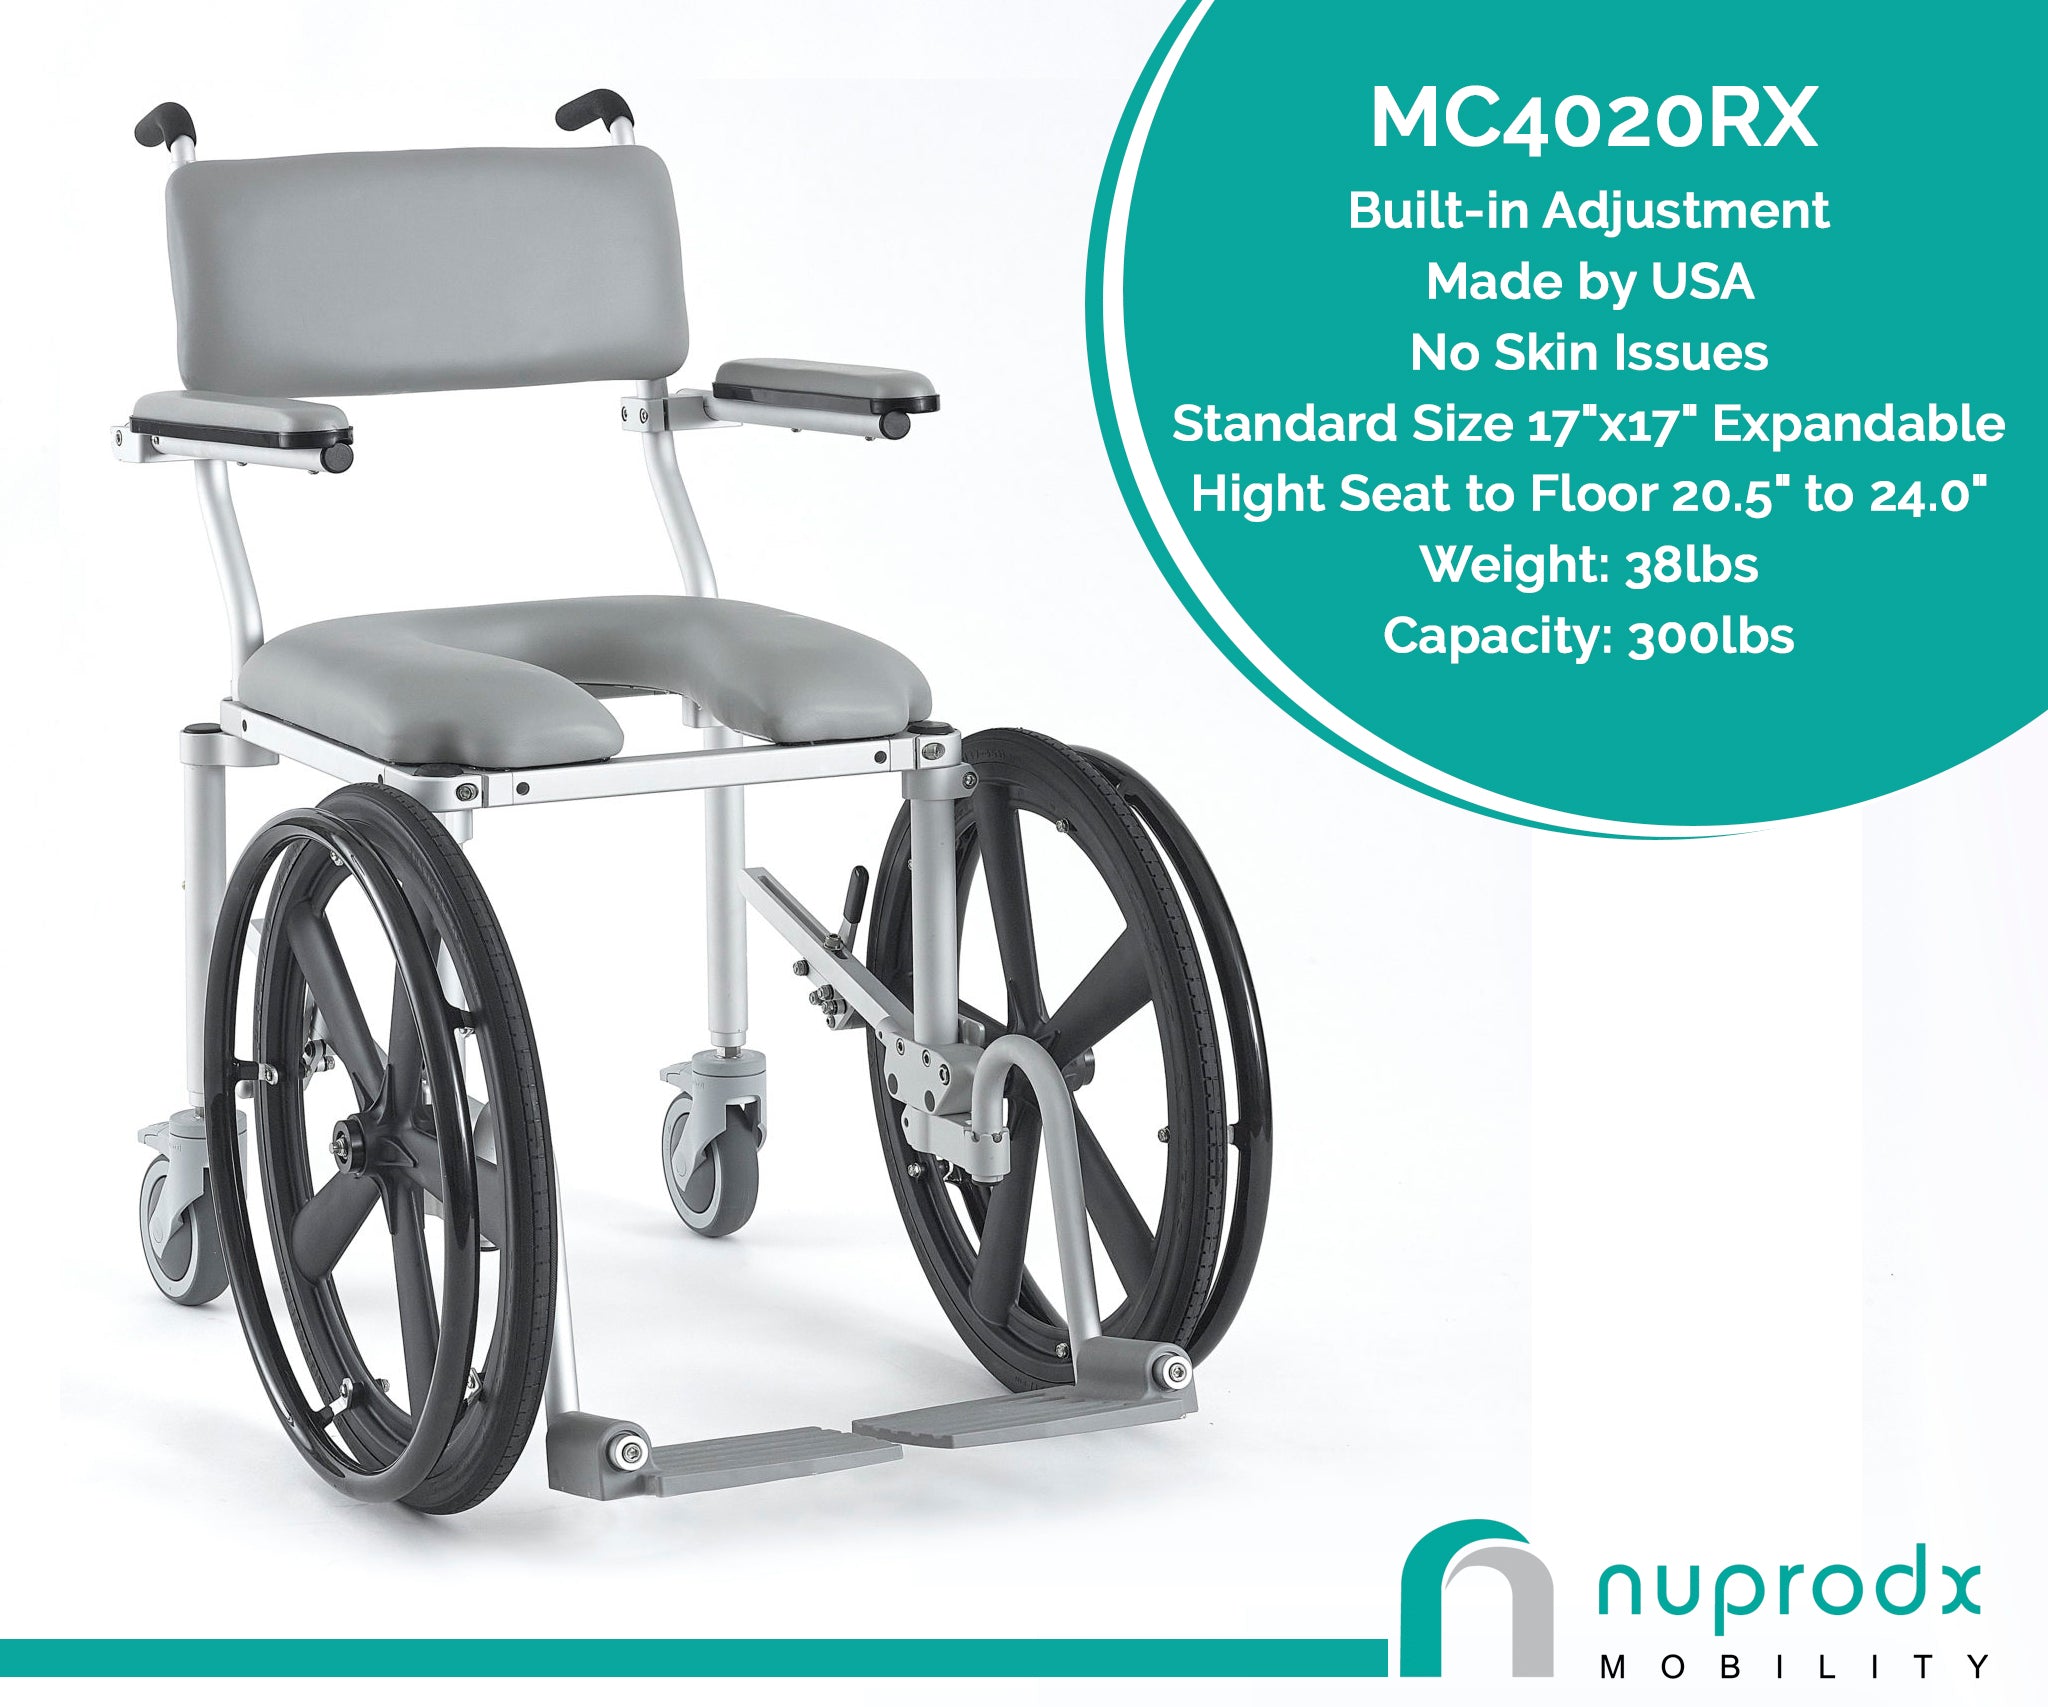 Nuprodx MC4020Rx - Self-propelled Shower and Commode Chair